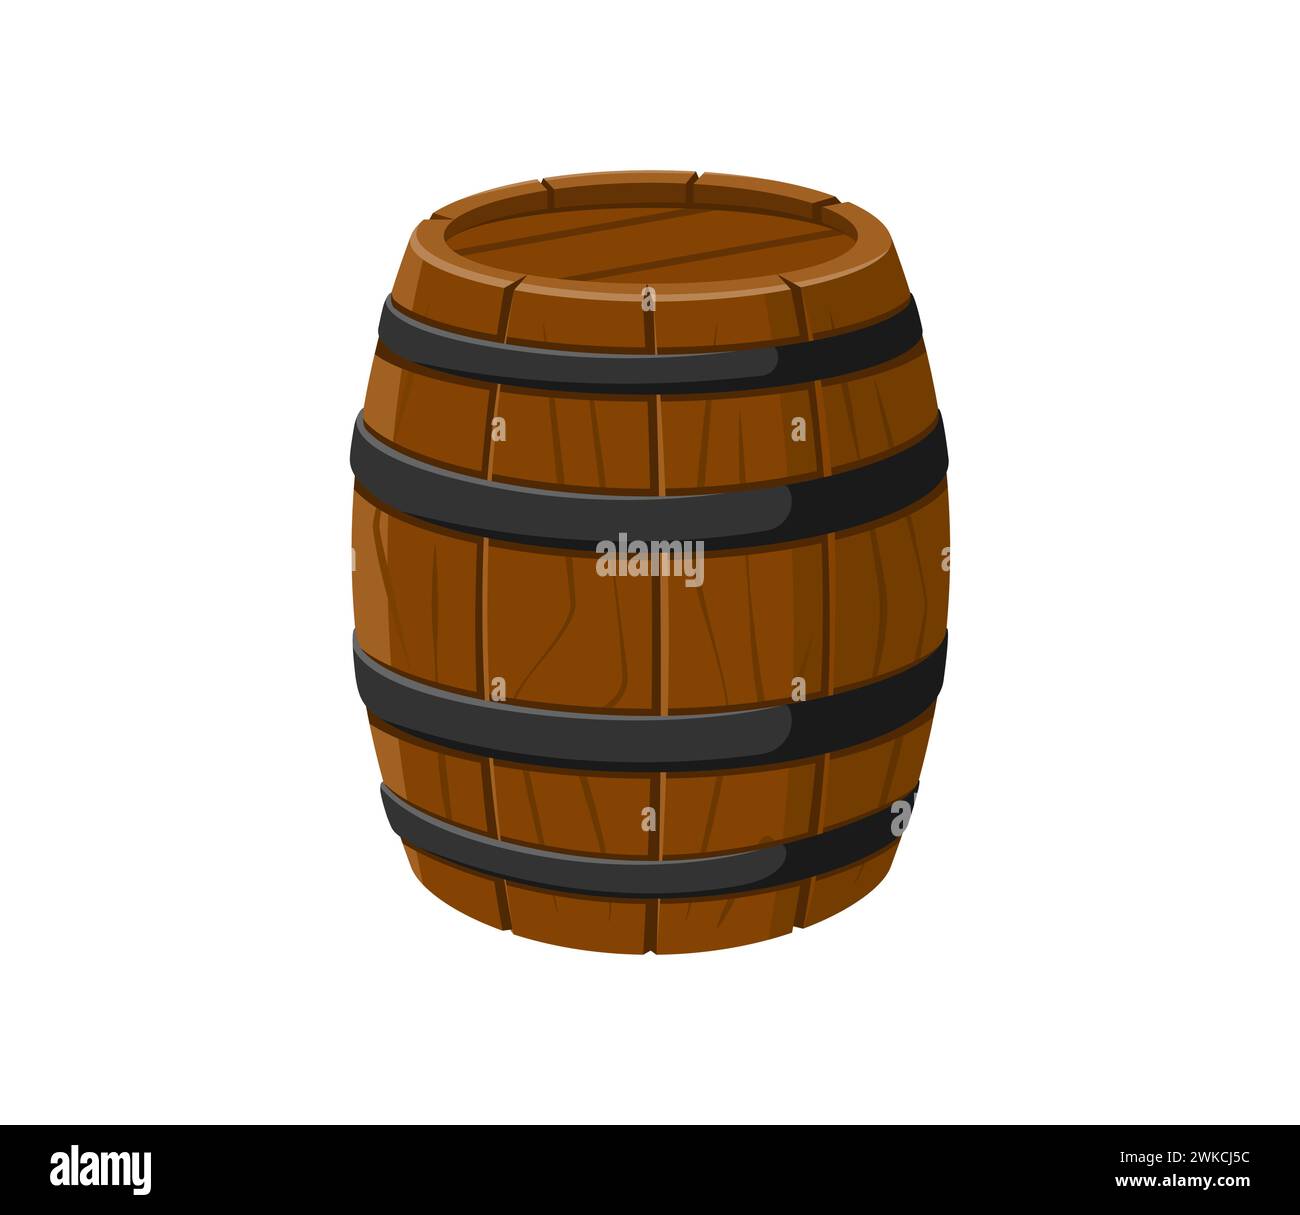 Cartoon pirate wooden barrel. Isolated vector rustic, cylindrical wooden cask, bound by metal hoops, used for storing rum, gunpowder, gold, beer, wine or provision. Game asset, pub or bar brewery item Stock Vector